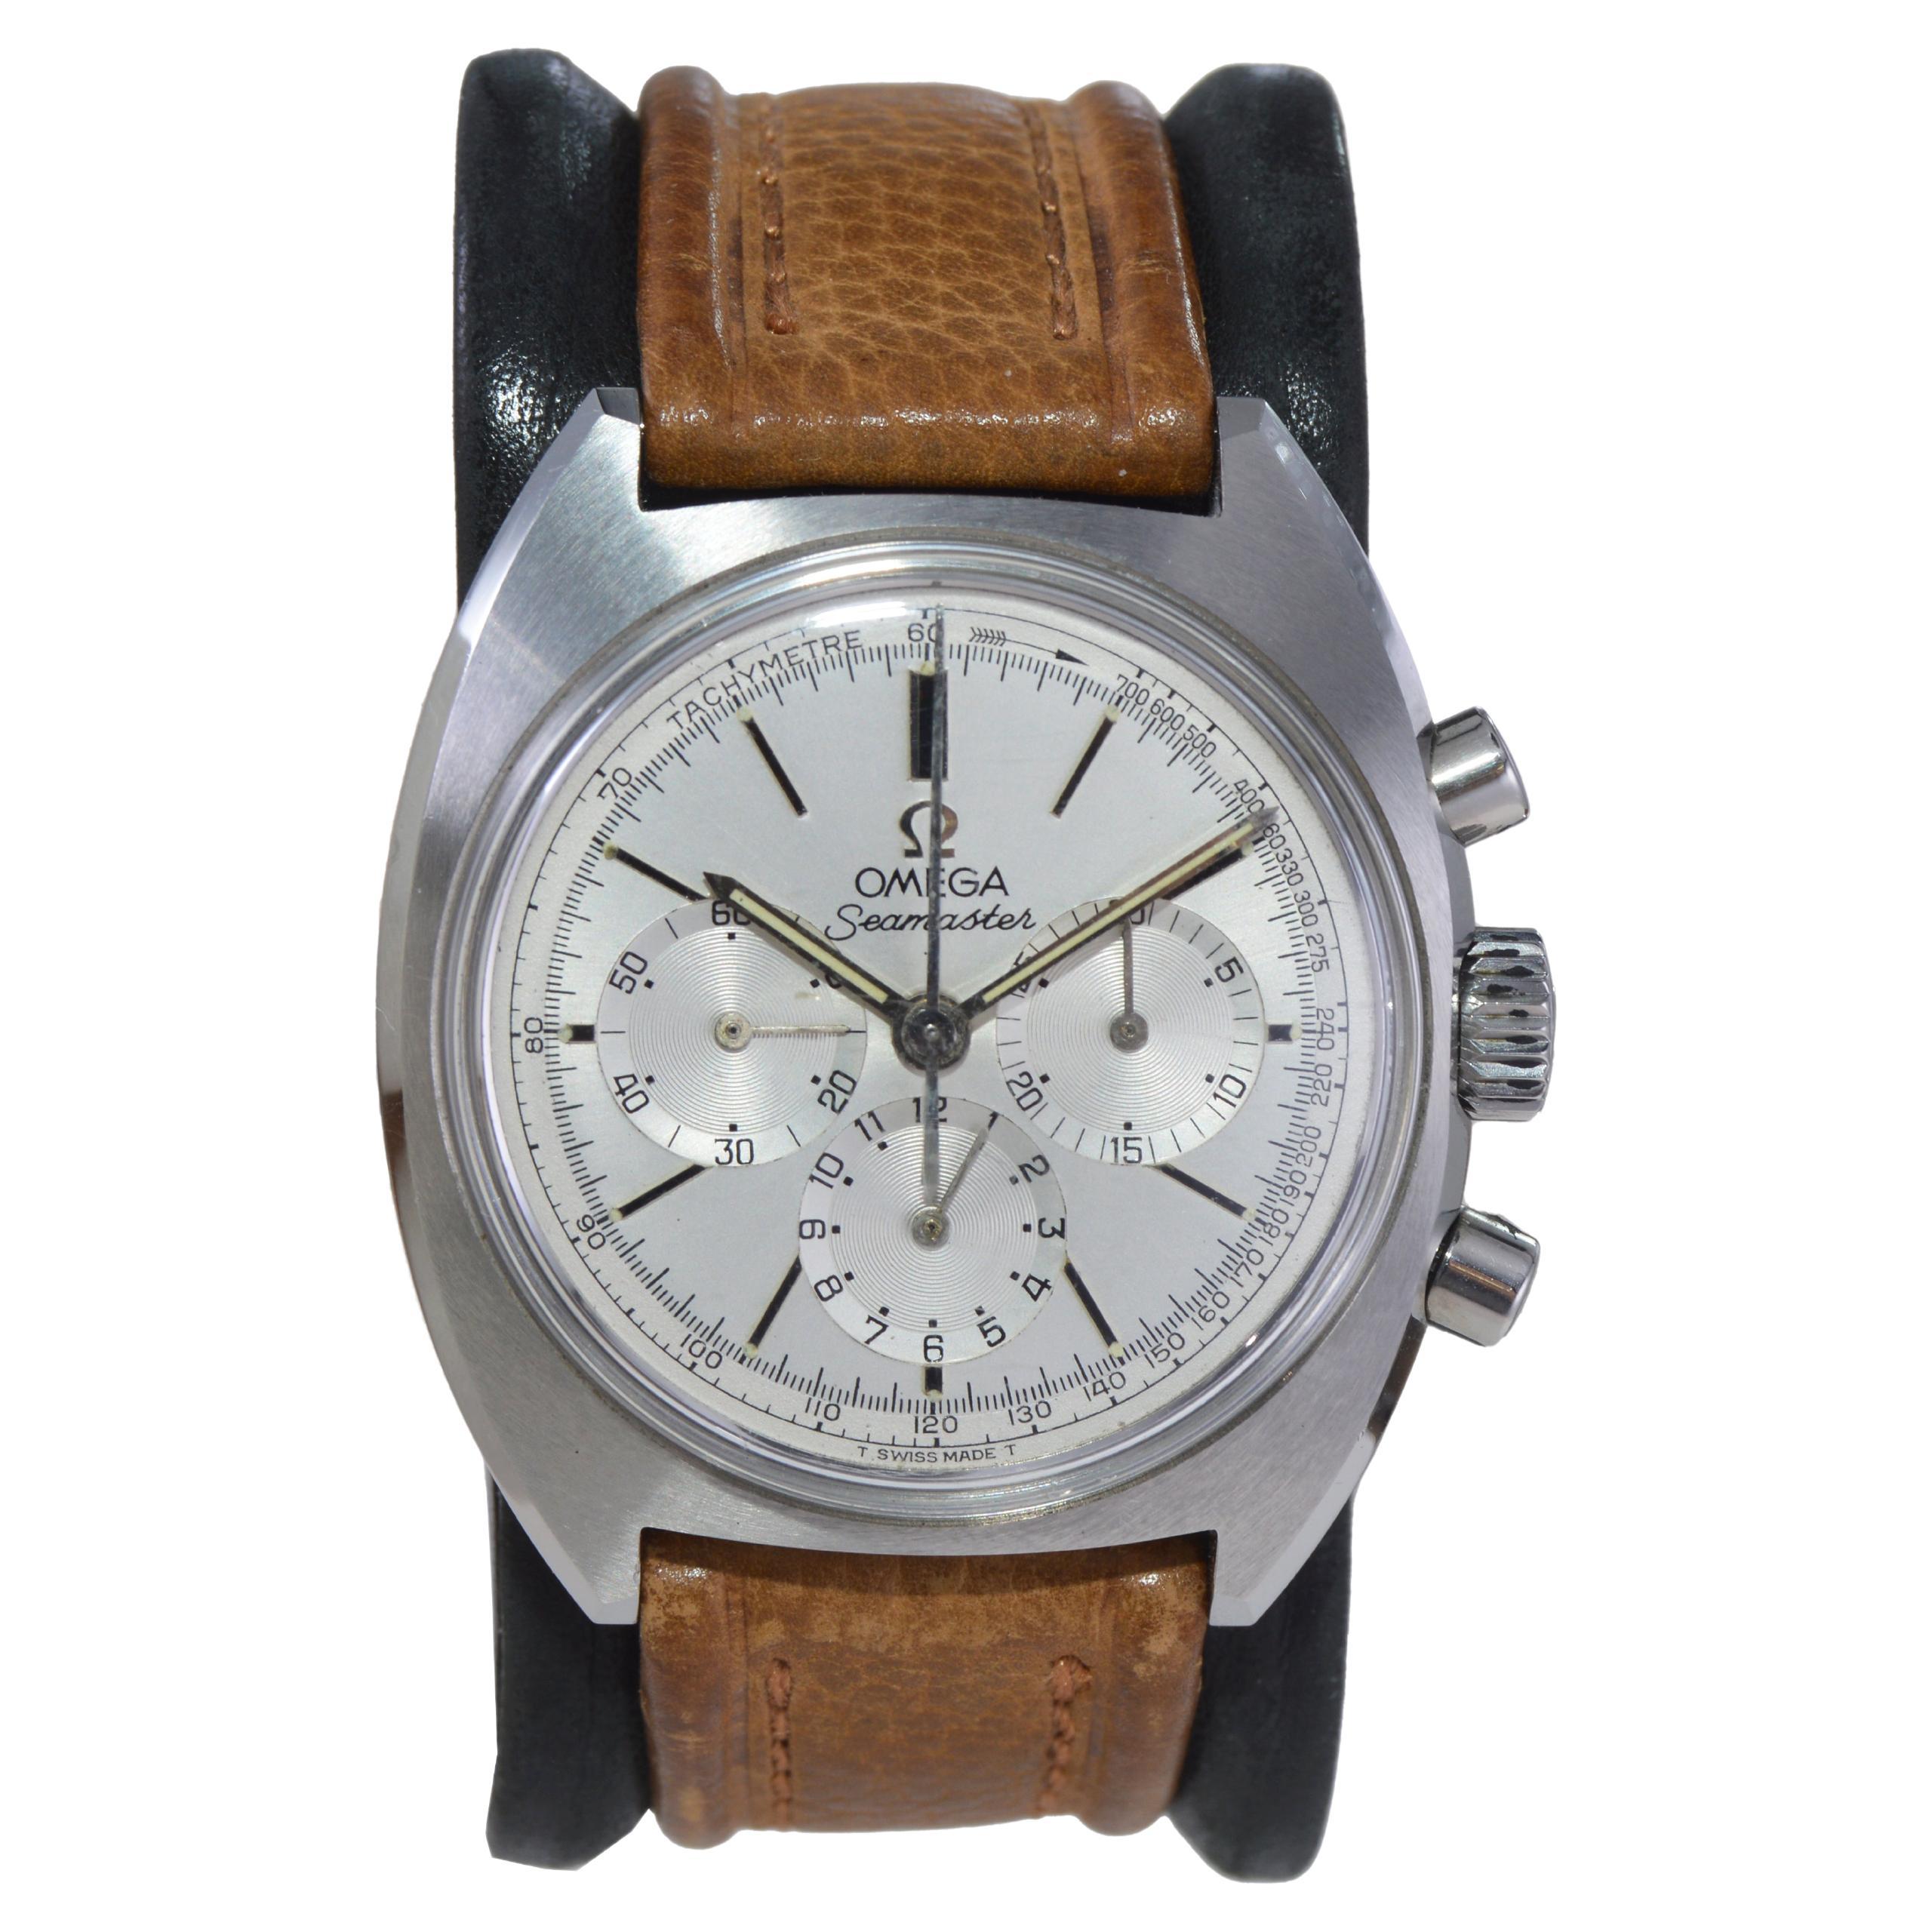 Omega Stainless Steel Seamaster Chronograph Cal 321 Manual Watch, 1960's